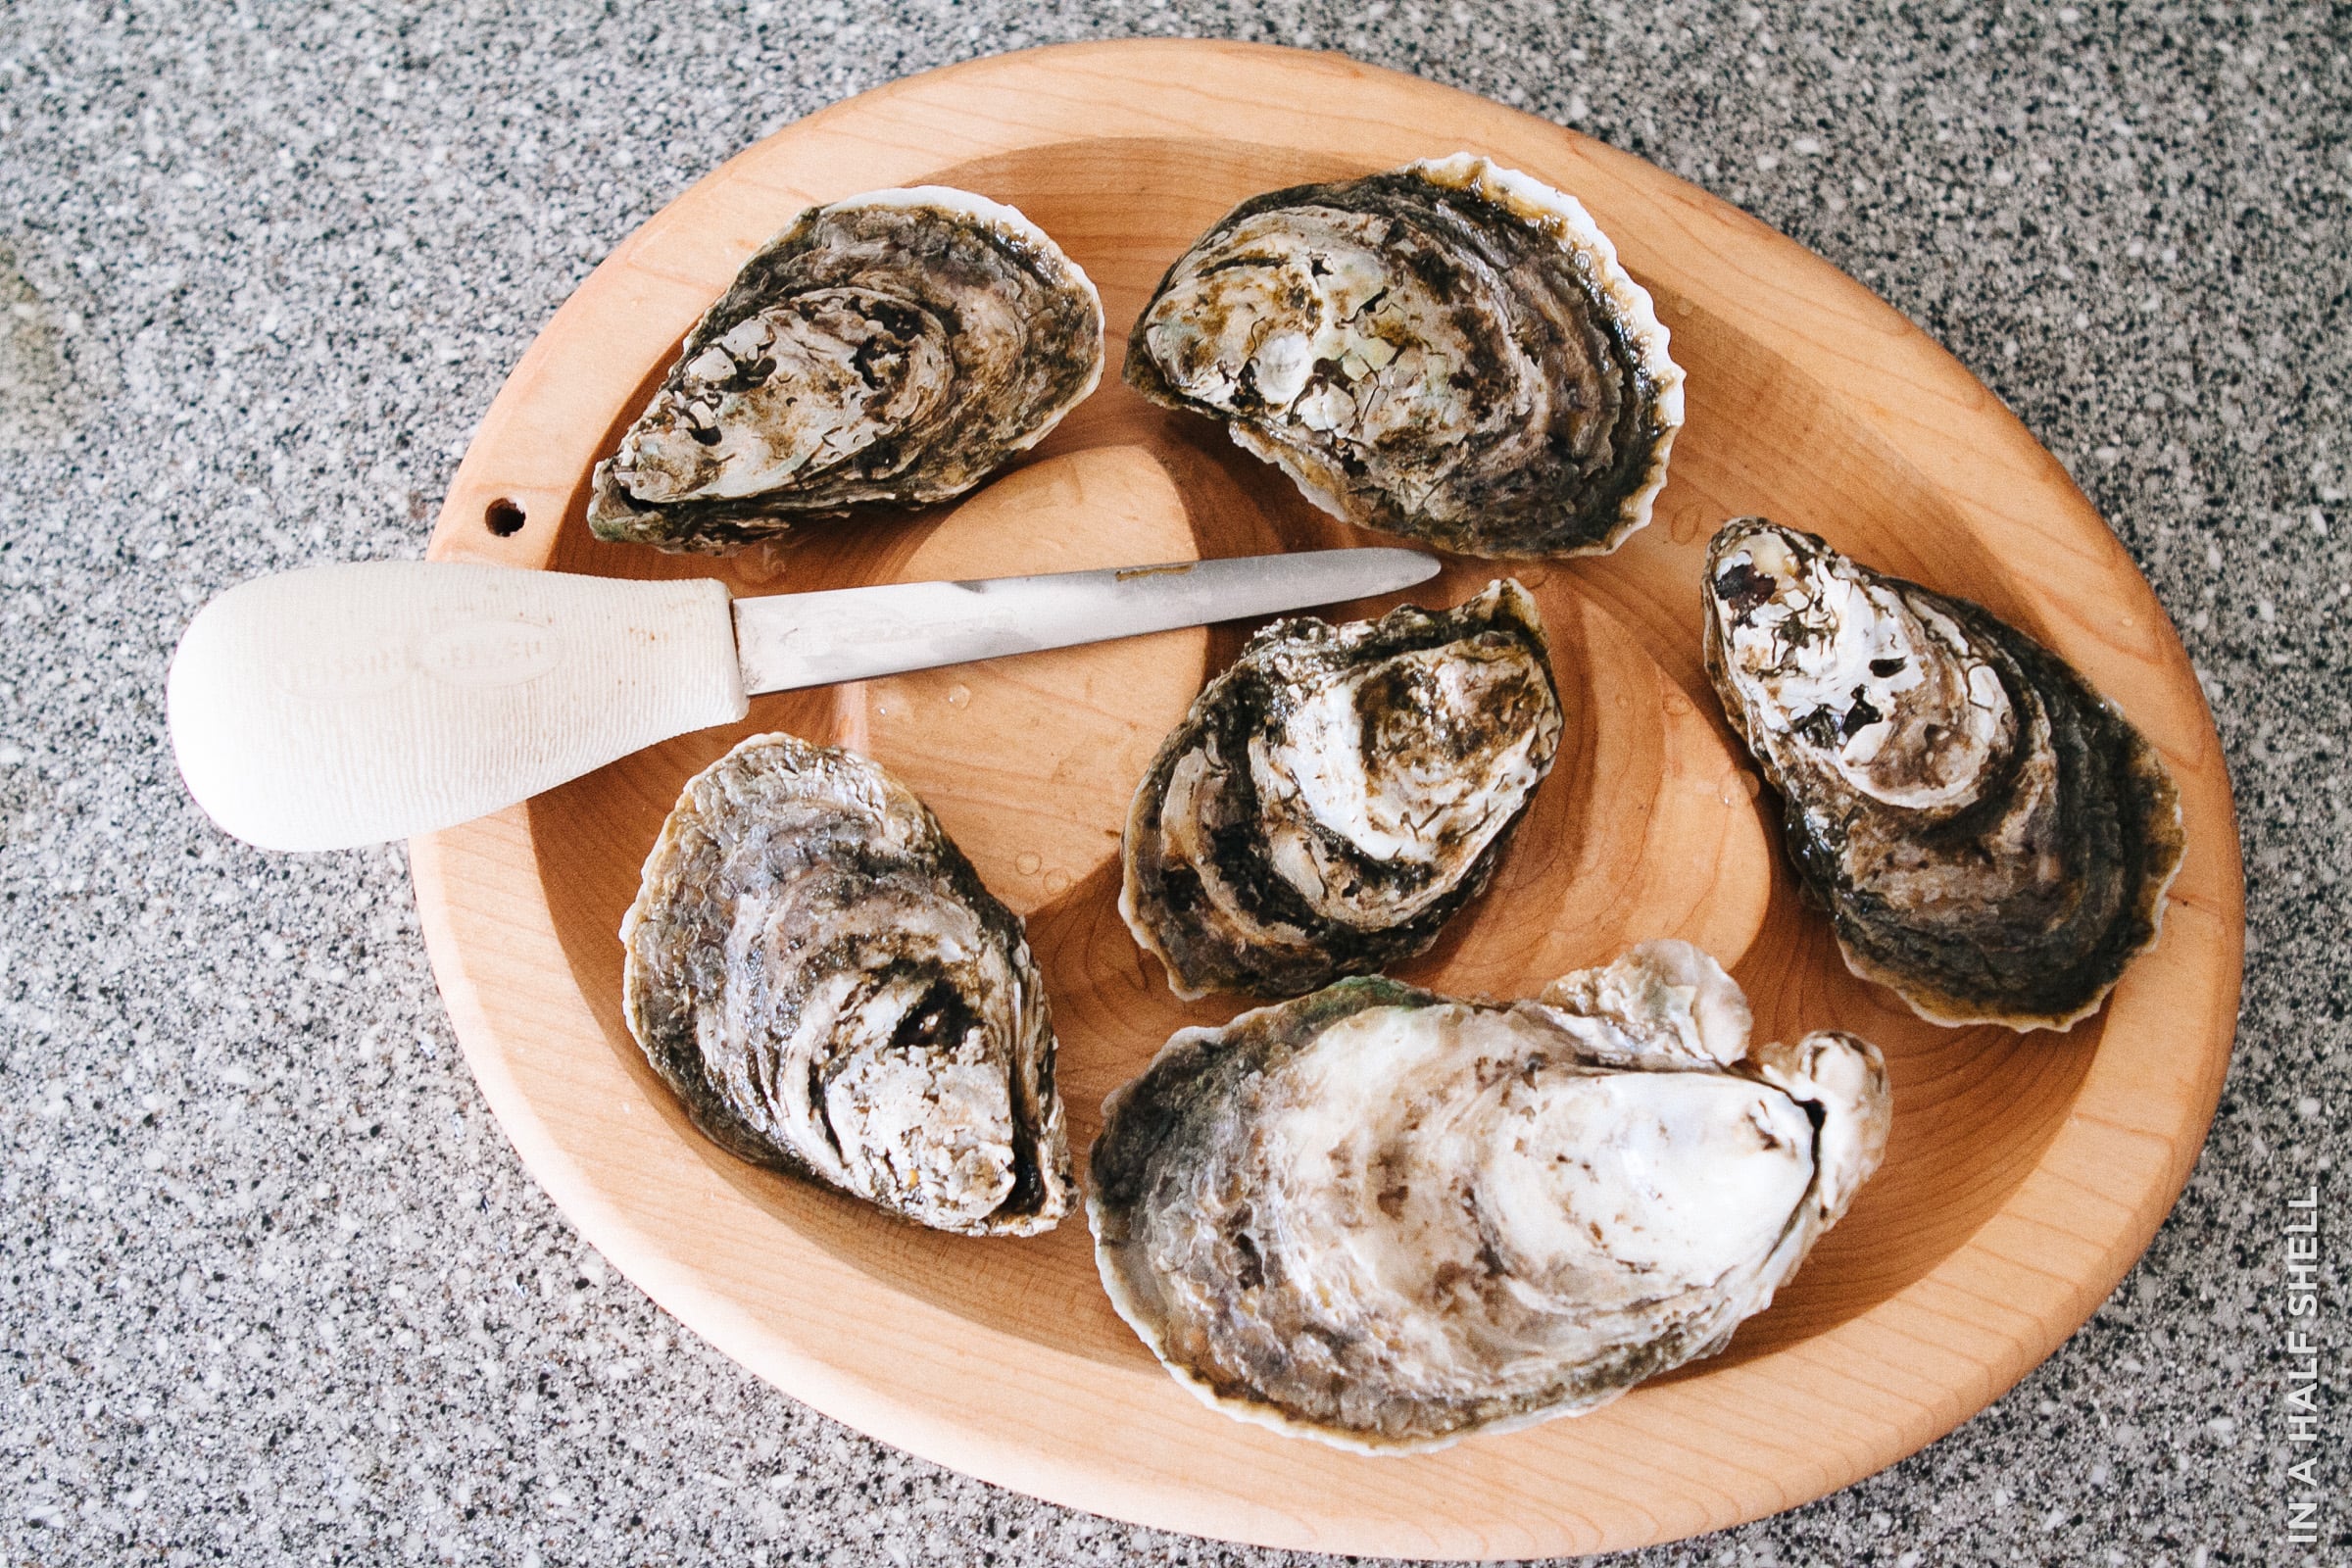 How To Enjoy Oysters At Home 2020 Update In A Half Shell